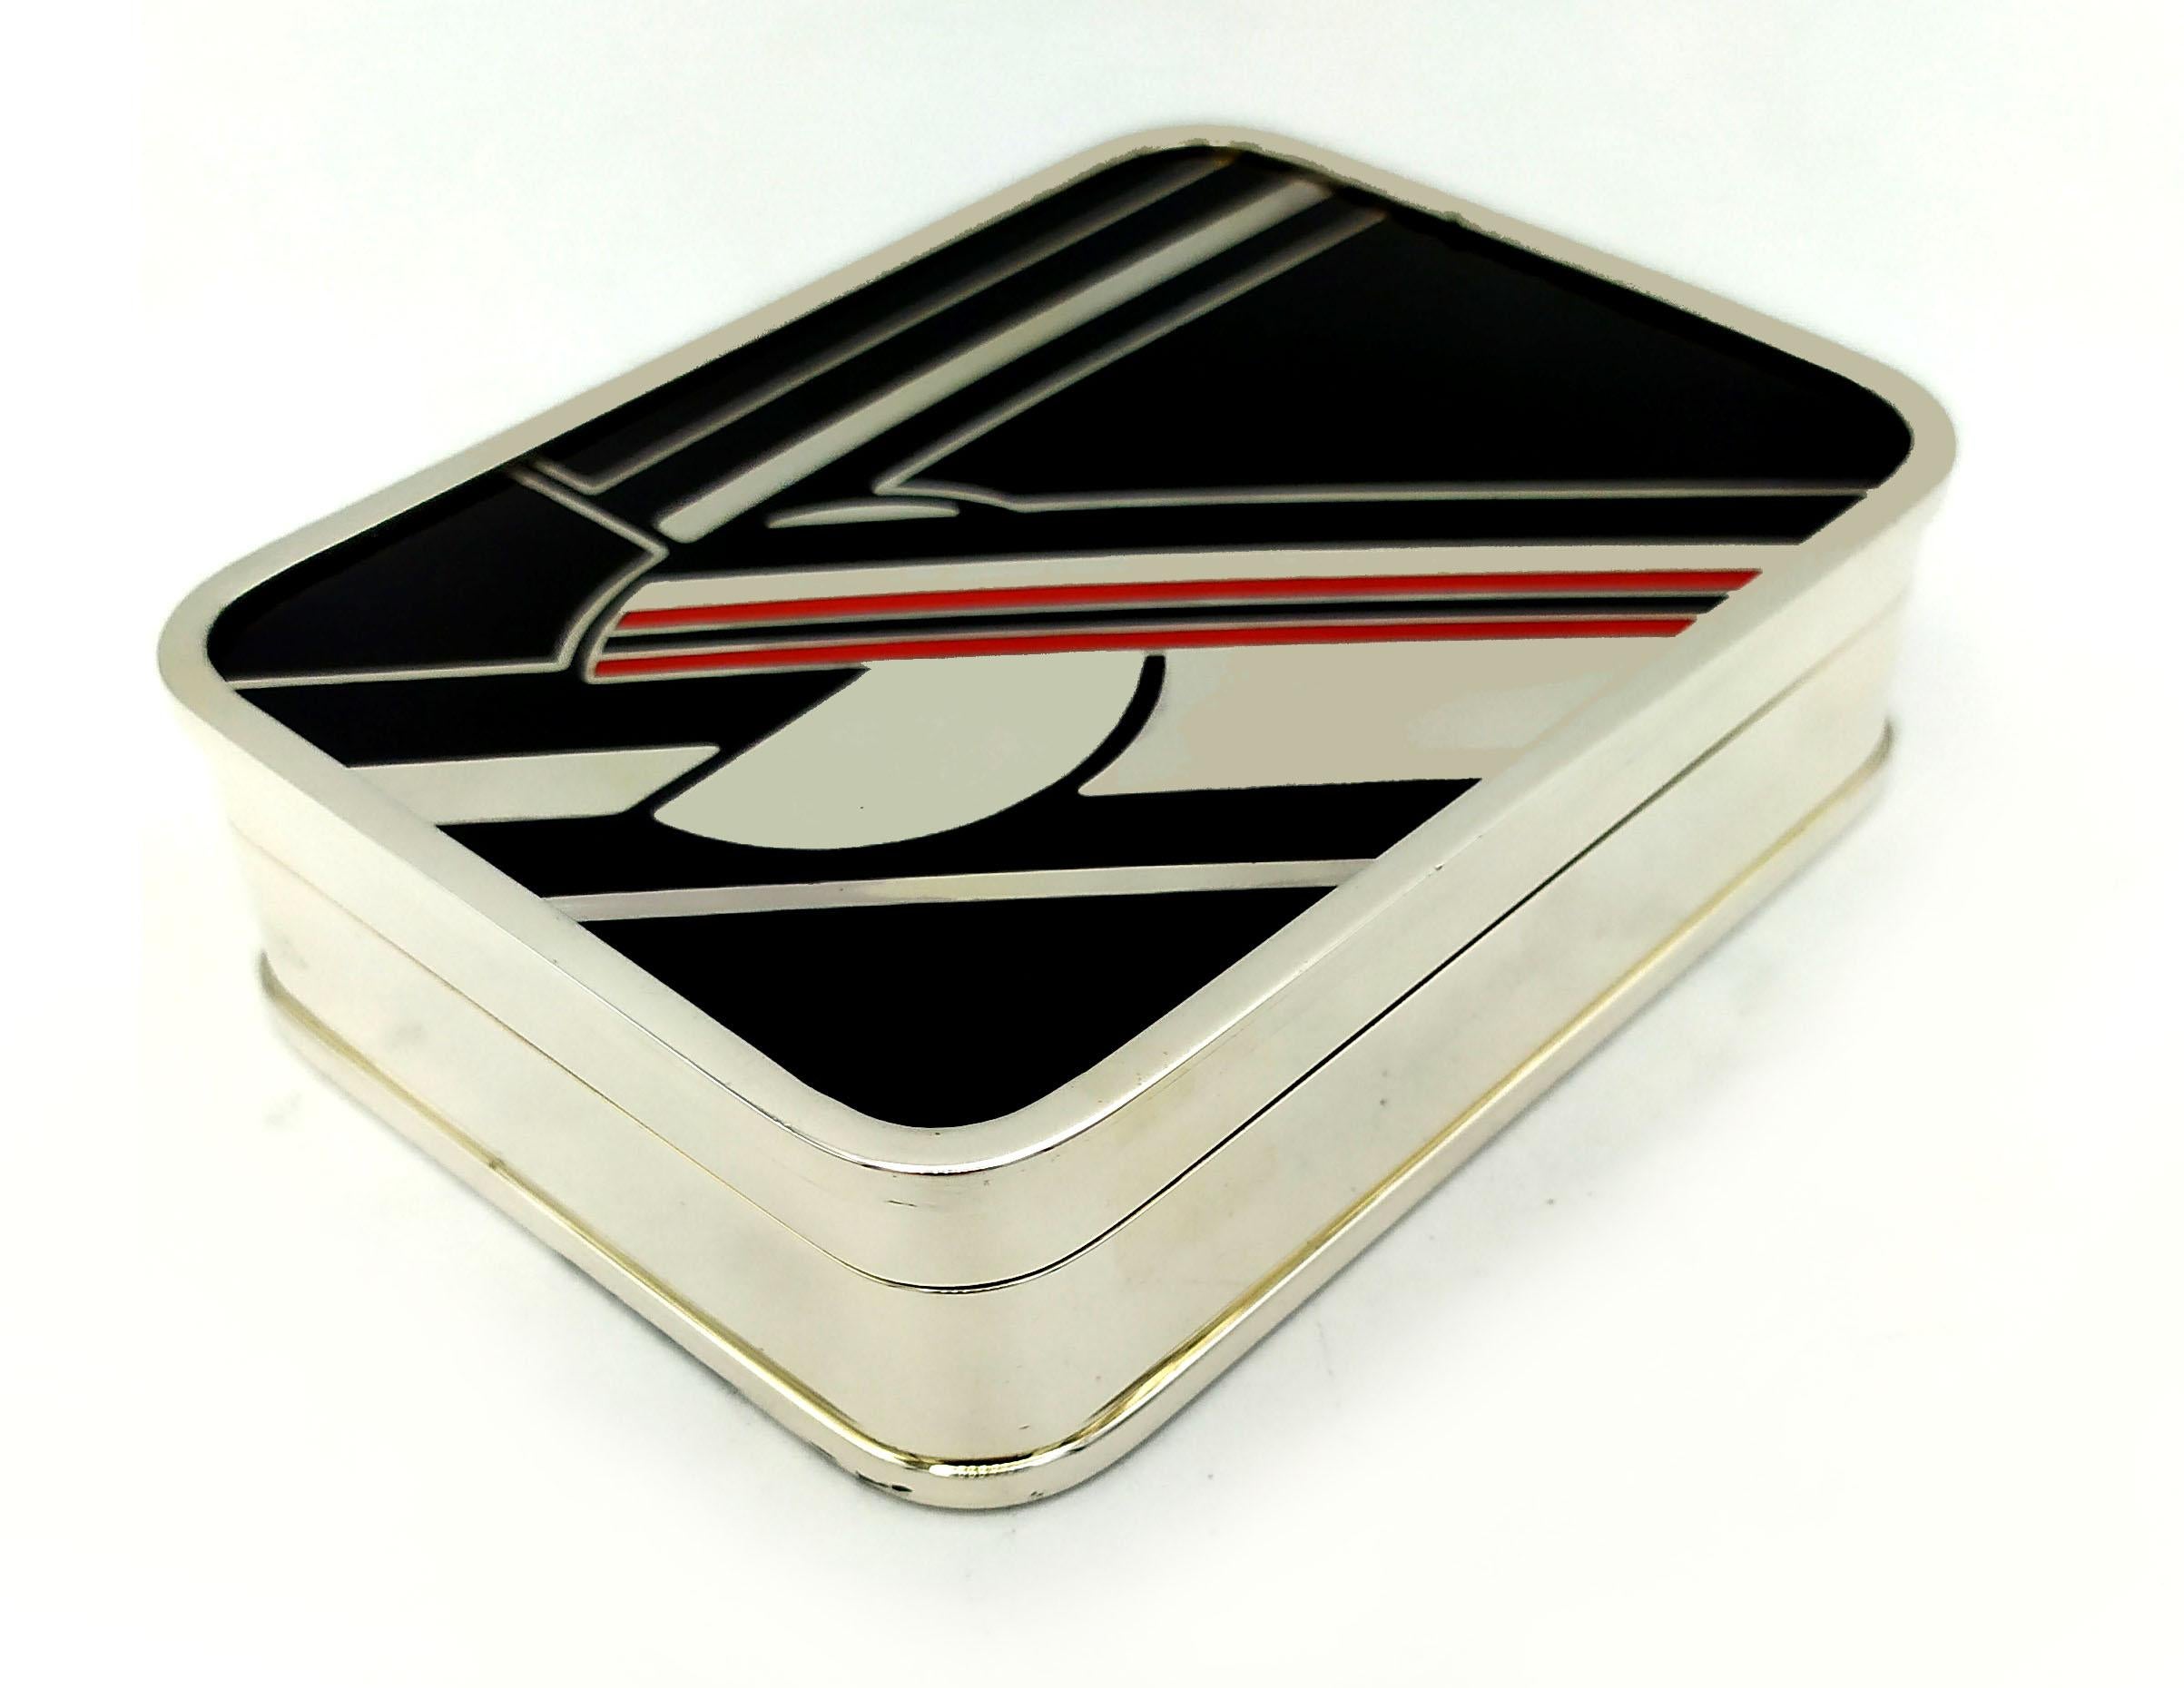 Box Black White and Red enamel is Inspired by drawings by Louis Cartier from the 1920 in Art Deco style and recreated for Cartier USA in the 1976.
It is in 925/1000 Sterling Silver.
Box Black White and Red has hand painted fired enamels geometric